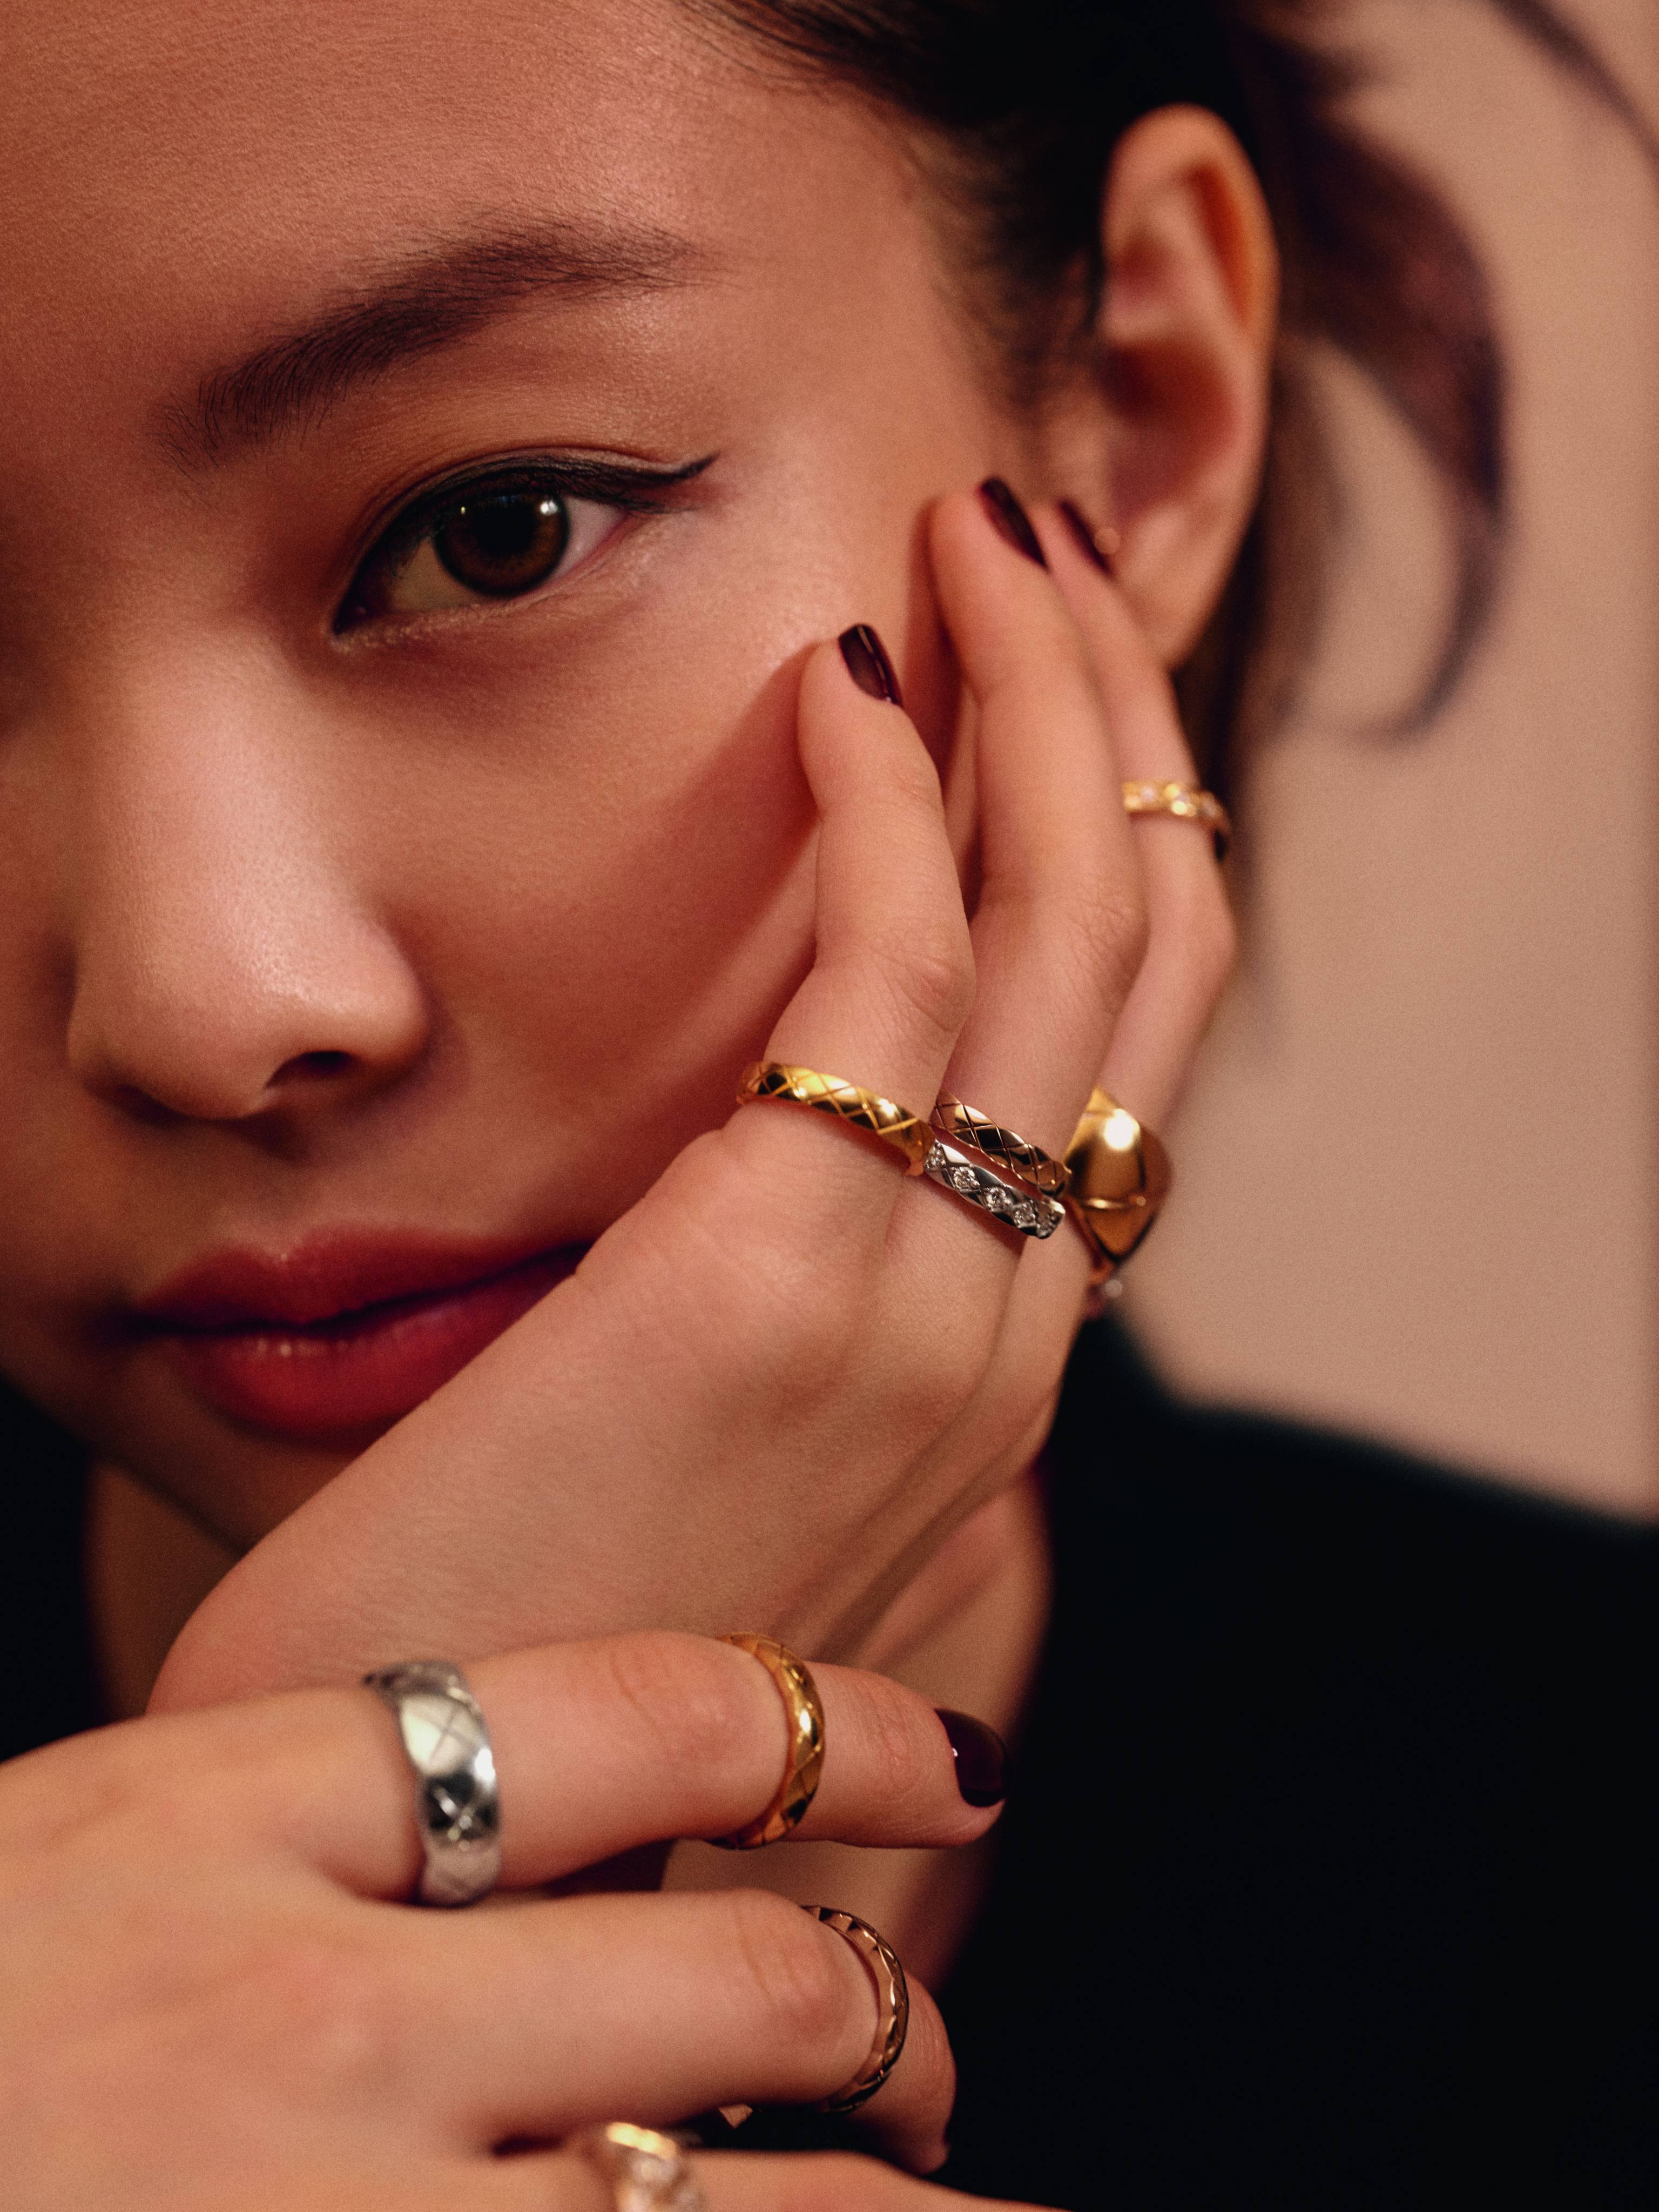 Jennie from K-pop girl group Blackpink shows off her gold jewellery. Such items need regular cleaning, but there are some dos and don’ts. Photo: Chanel